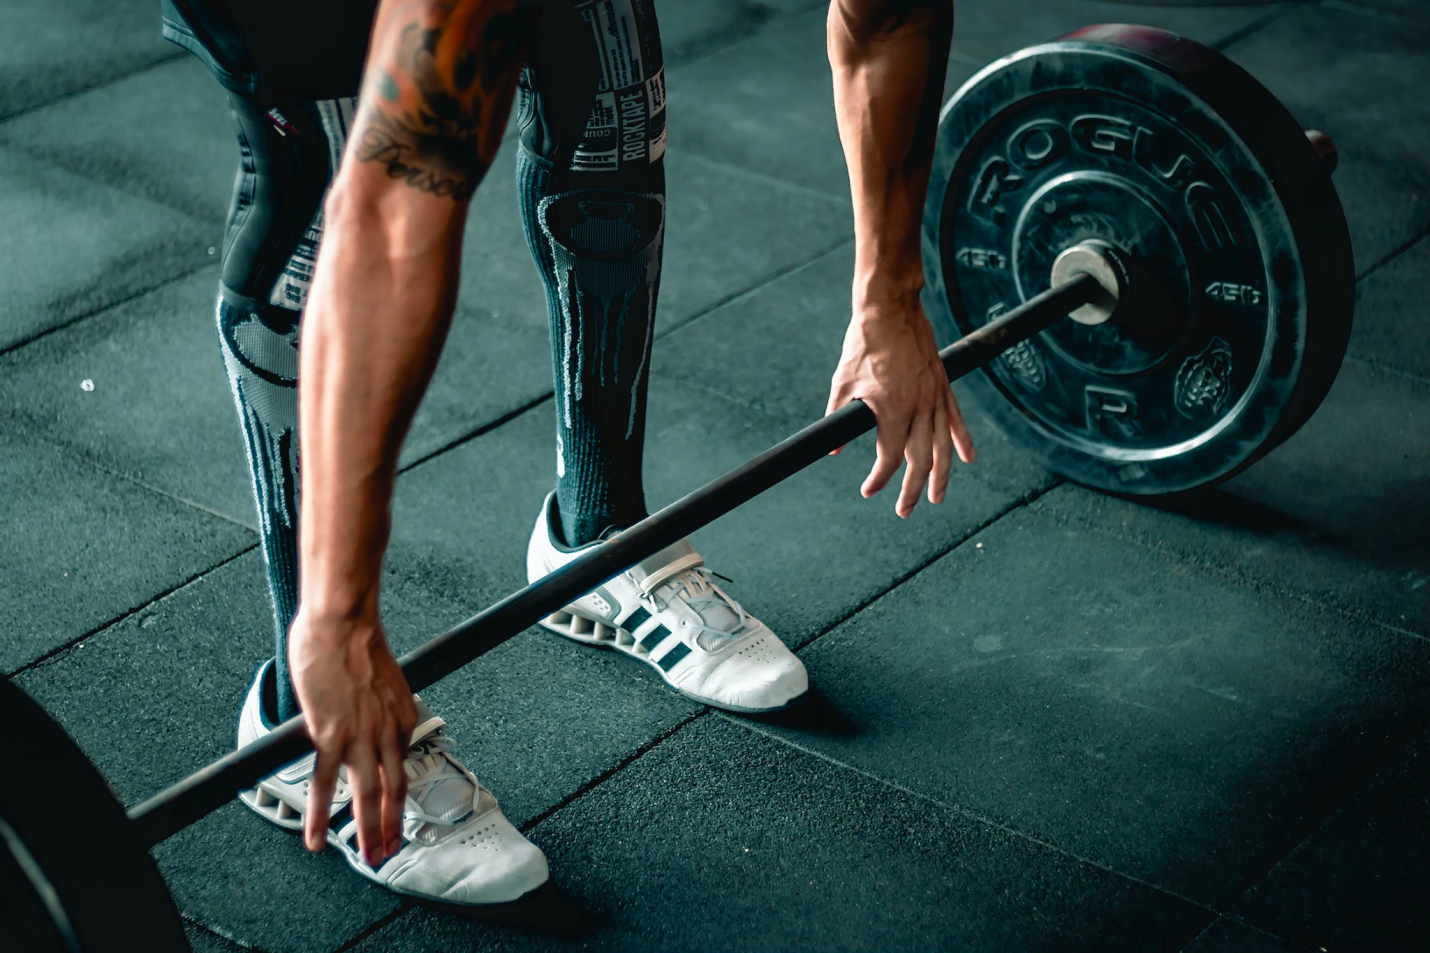 A person safely lifts a barbell to perform a deadlift.